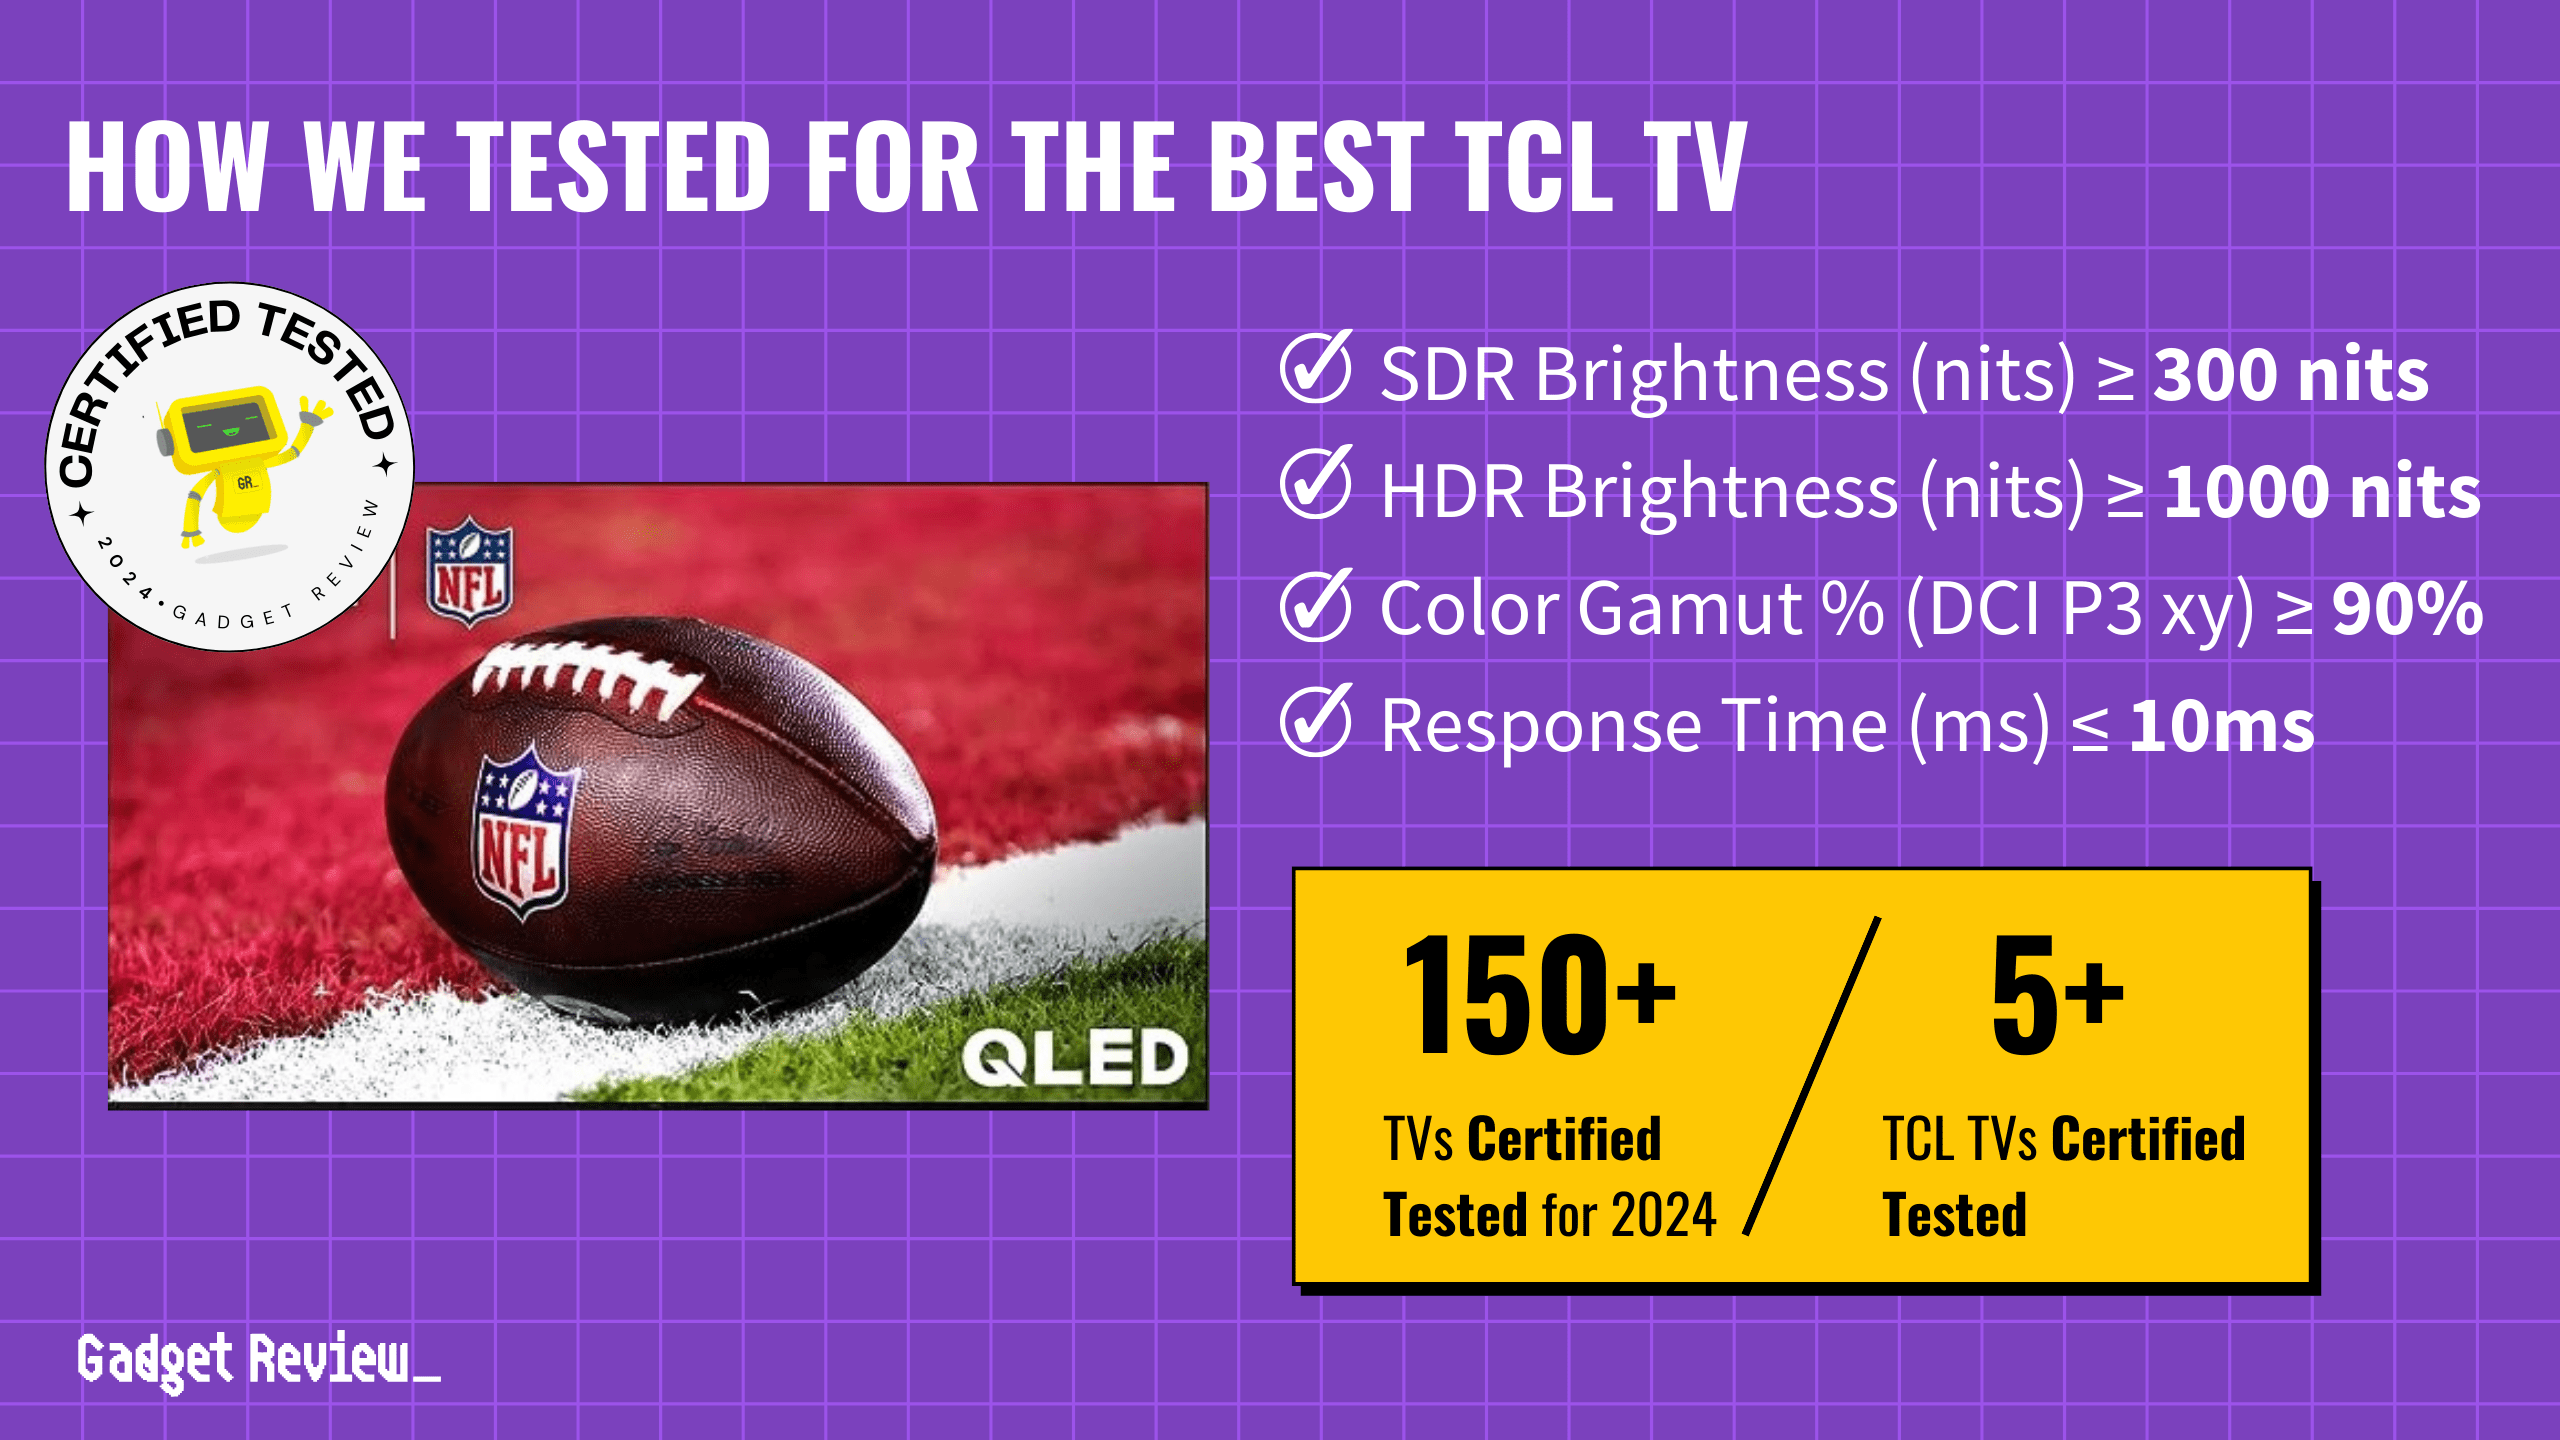 best tcl tv guide that shows the top best tv model